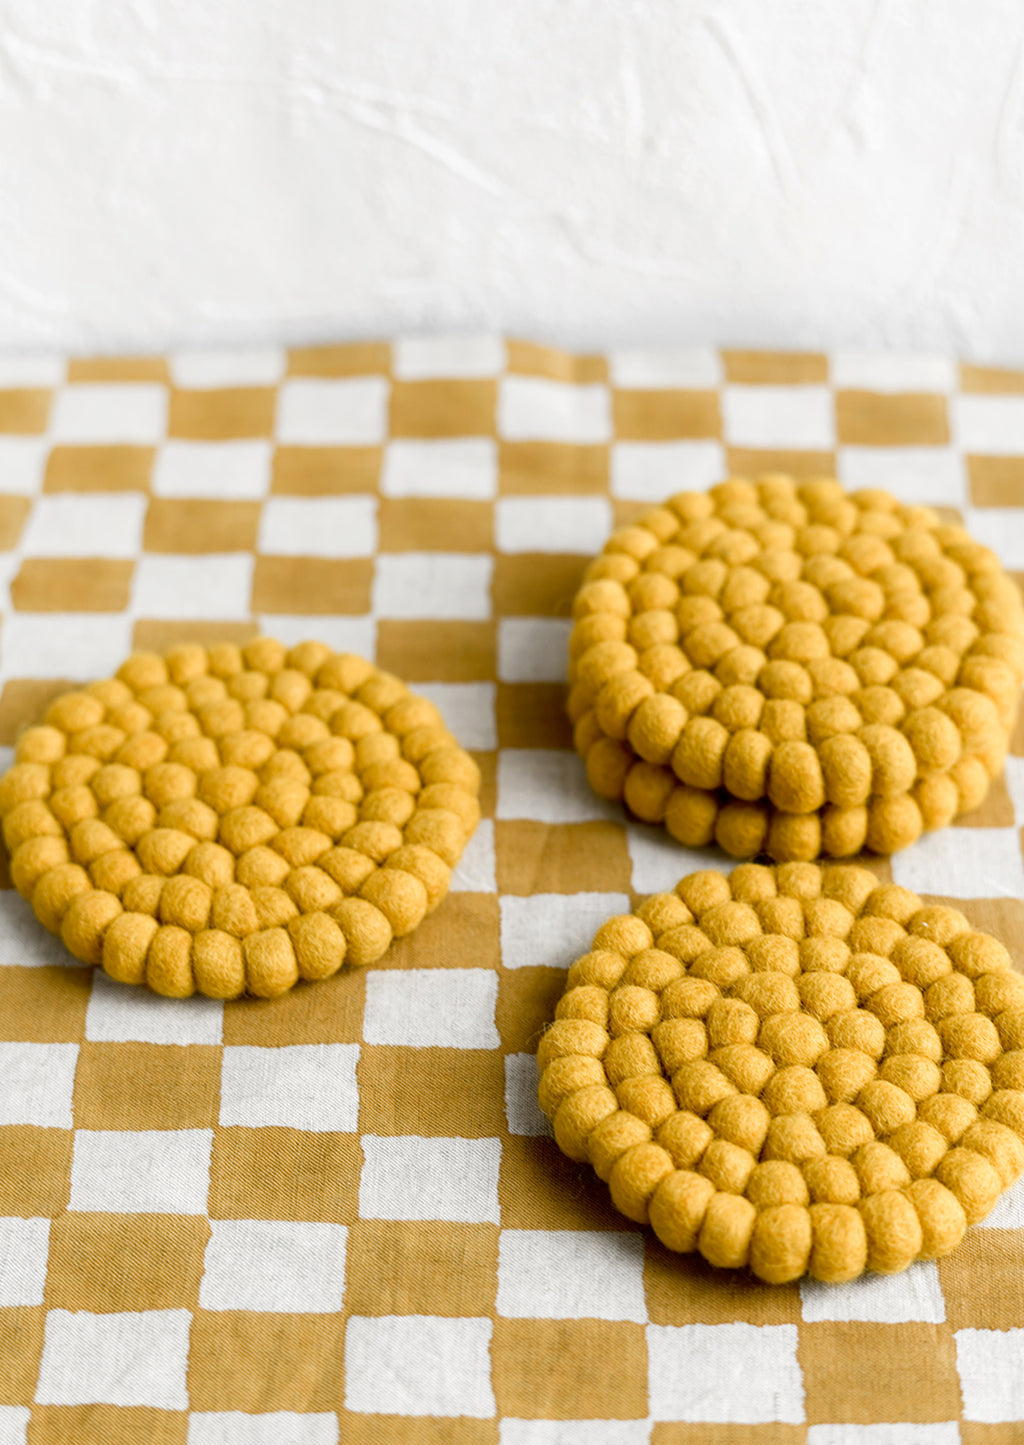 Mustard: A set of round felted wool coasters in mustard.